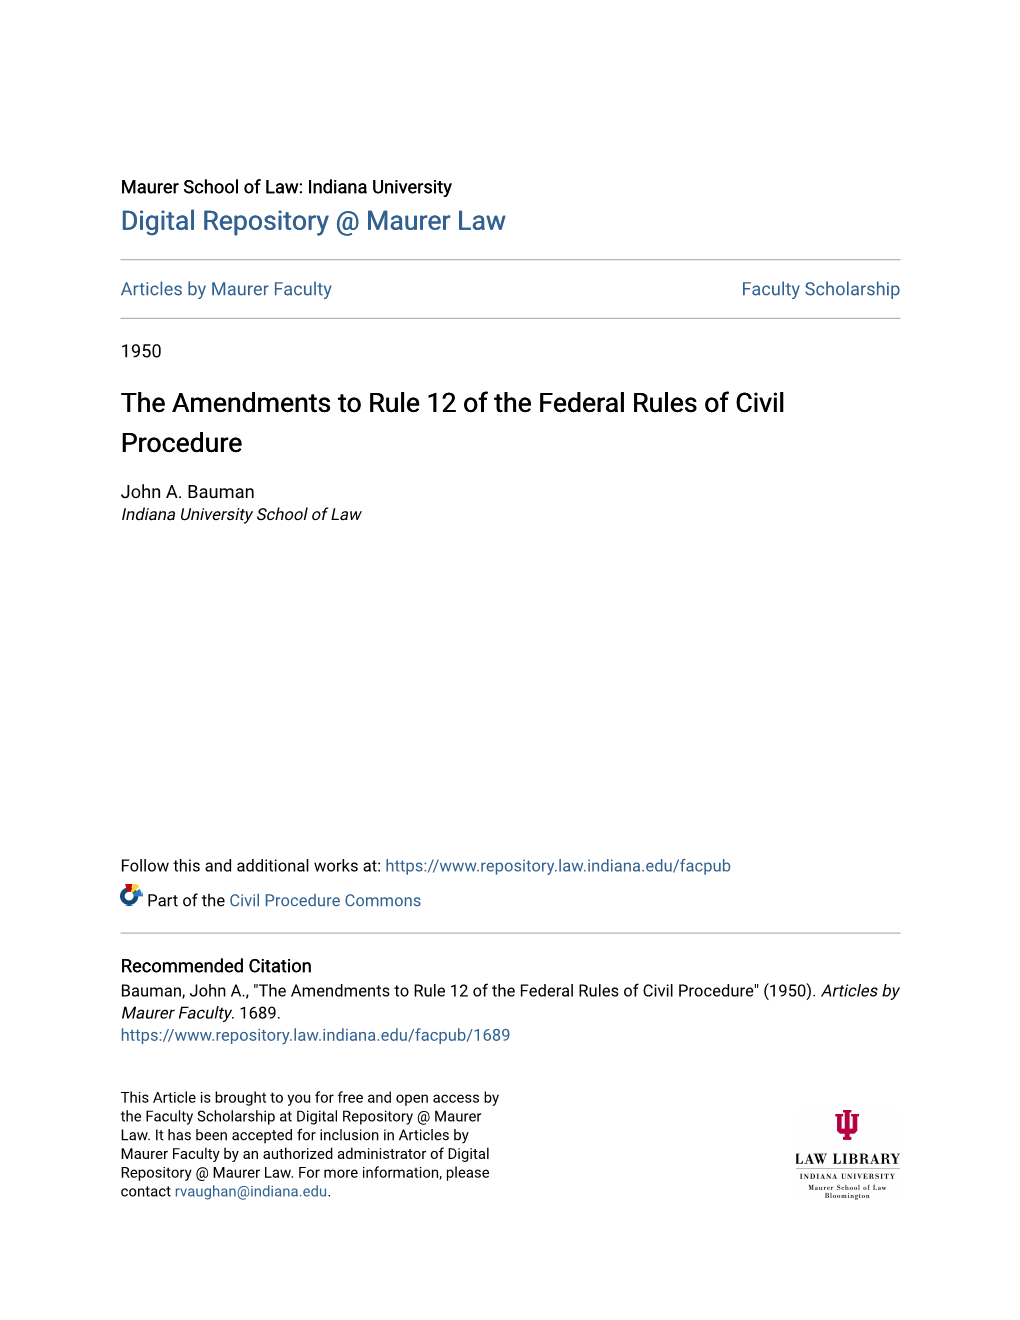 The Amendments to Rule 12 of the Federal Rules of Civil Procedure